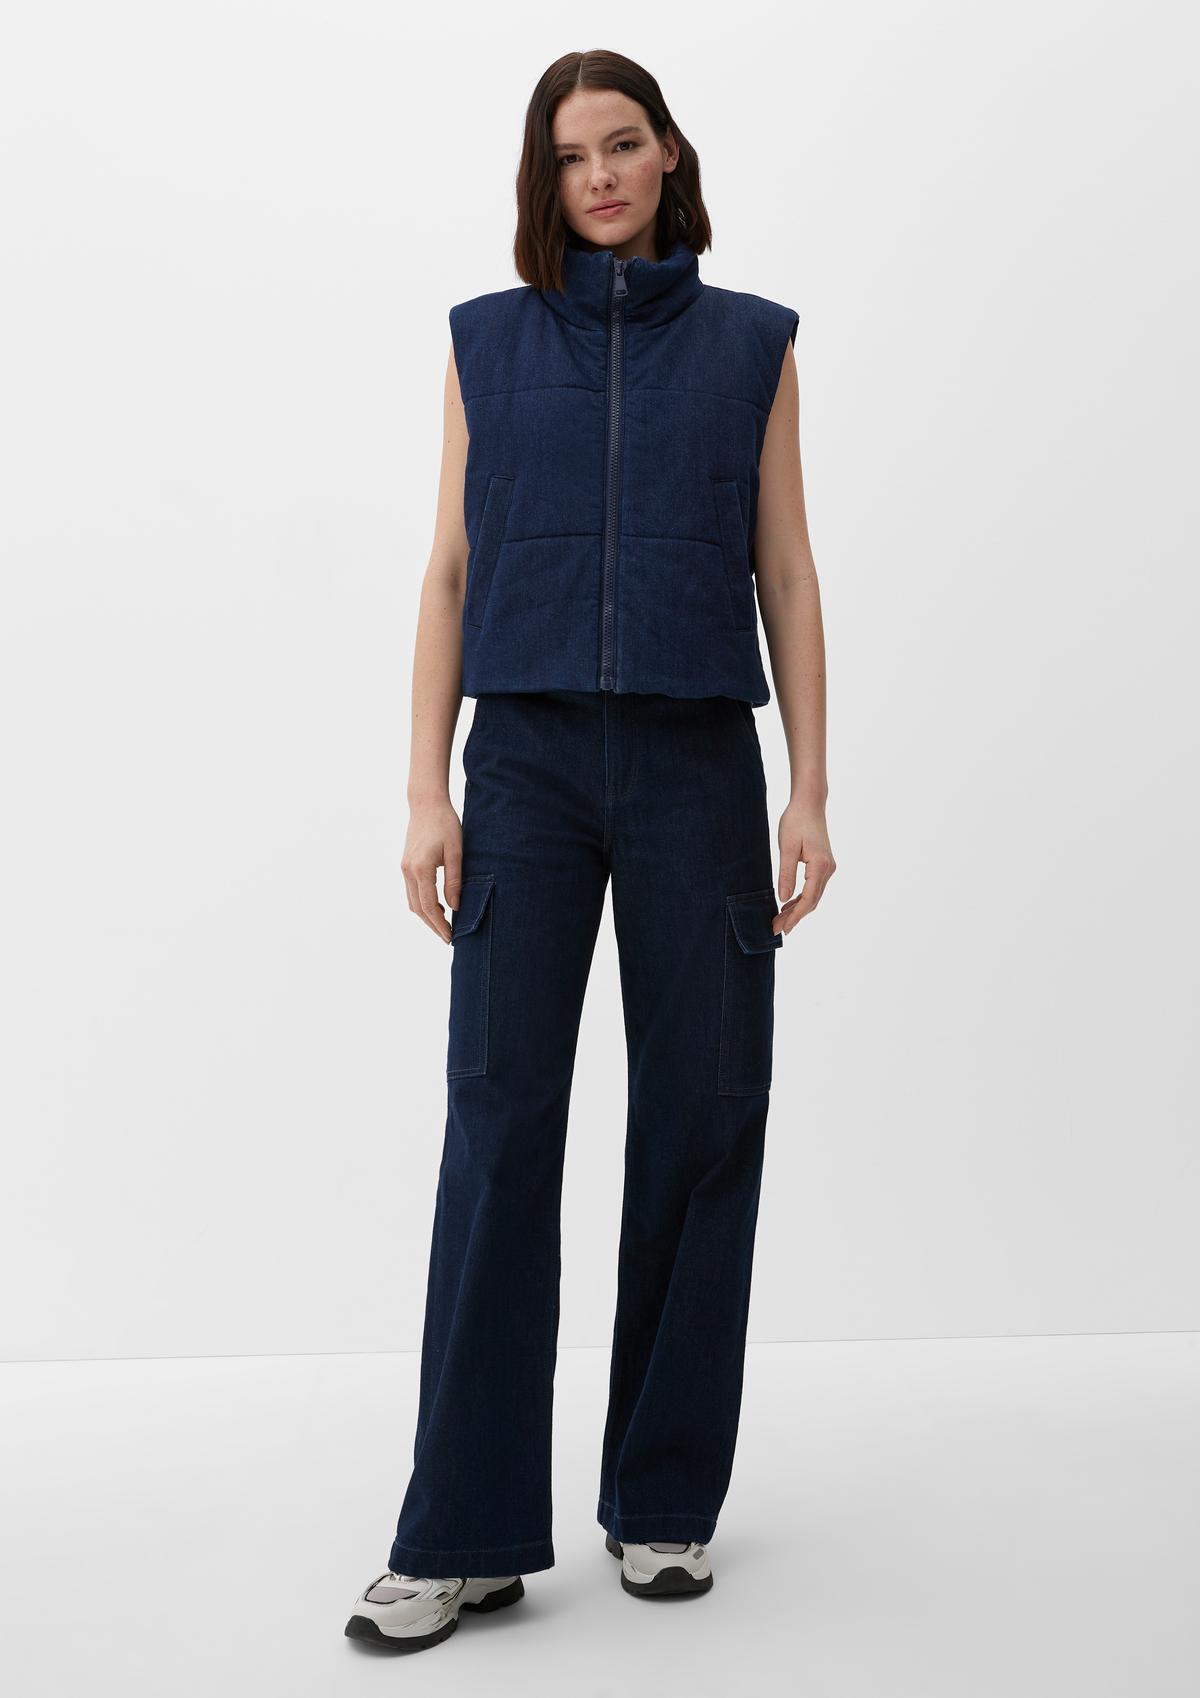 s.Oliver Denim waistcoat with a stand-up collar